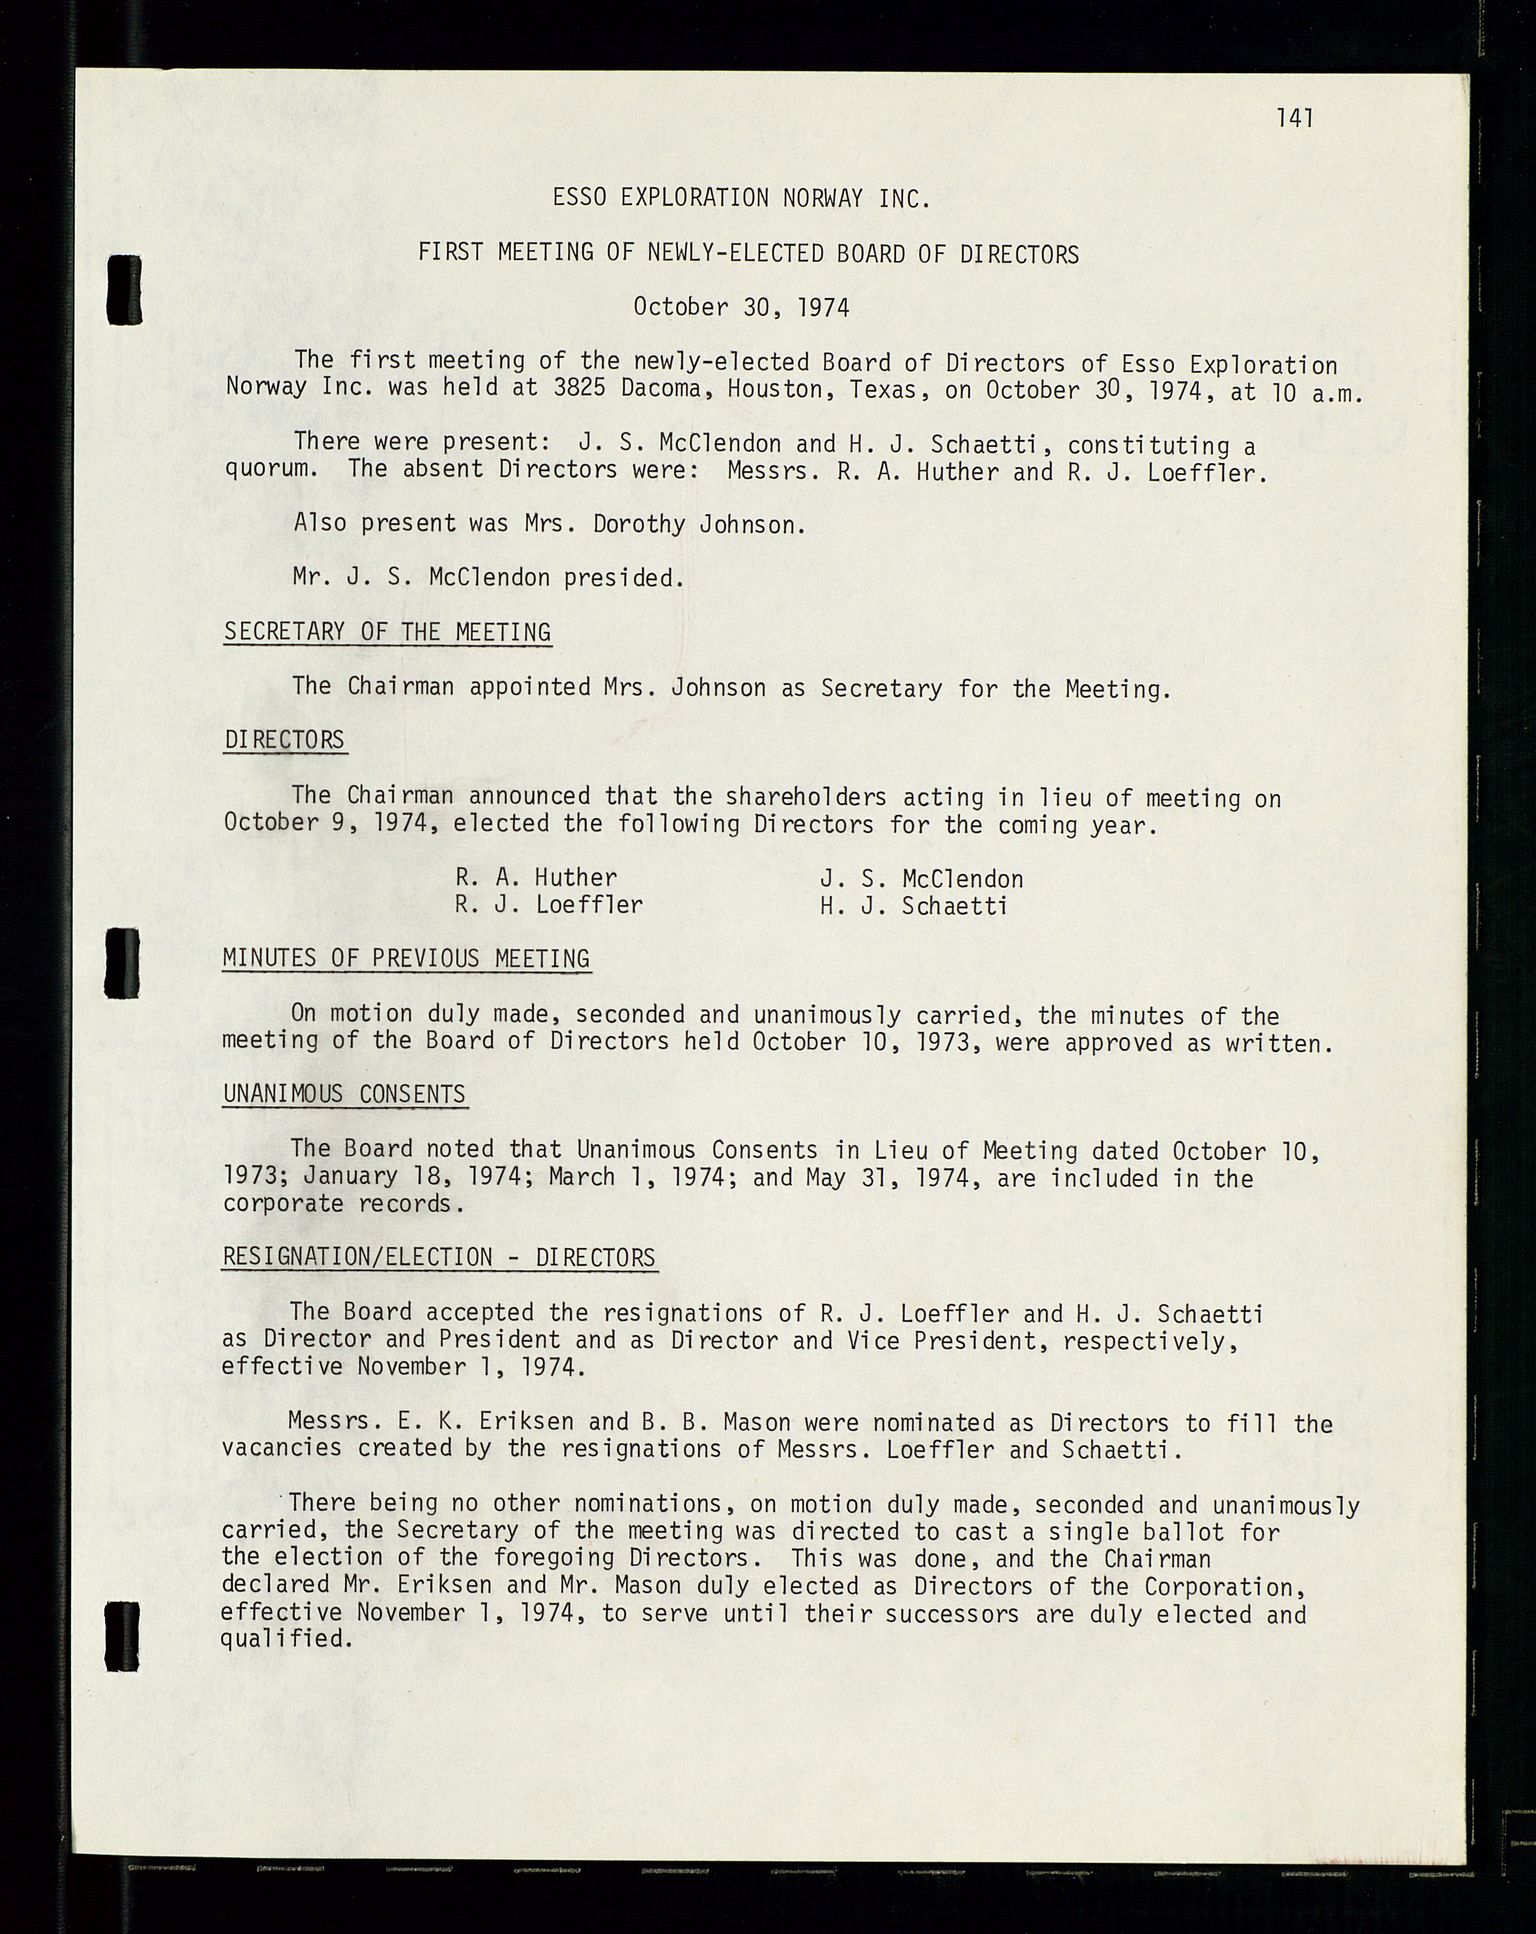 Pa 1512 - Esso Exploration and Production Norway Inc., SAST/A-101917/A/Aa/L0001/0001: Styredokumenter / Corporate records, By-Laws, Board meeting minutes, Incorporations, 1965-1975, p. 141